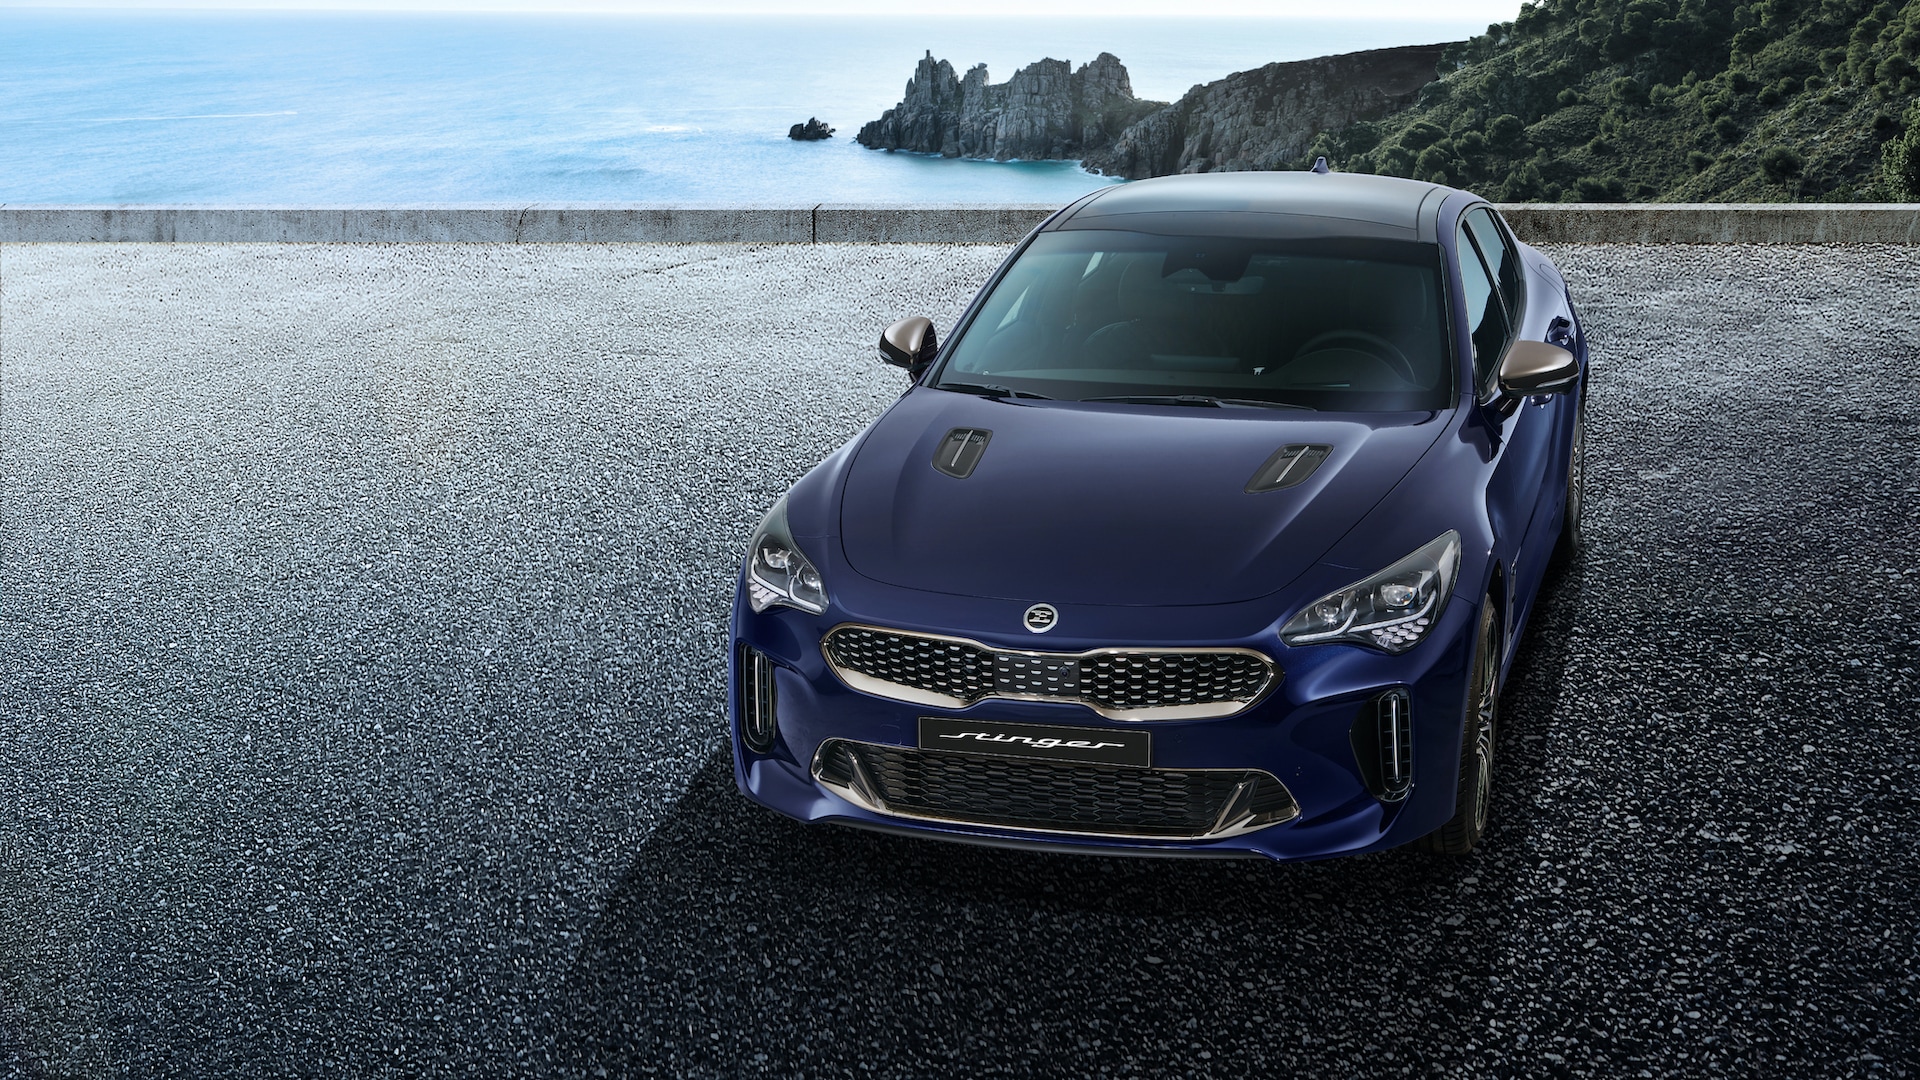 Instead of the Axe, 2022 Kia Stinger Survives With Refresh, New Engine